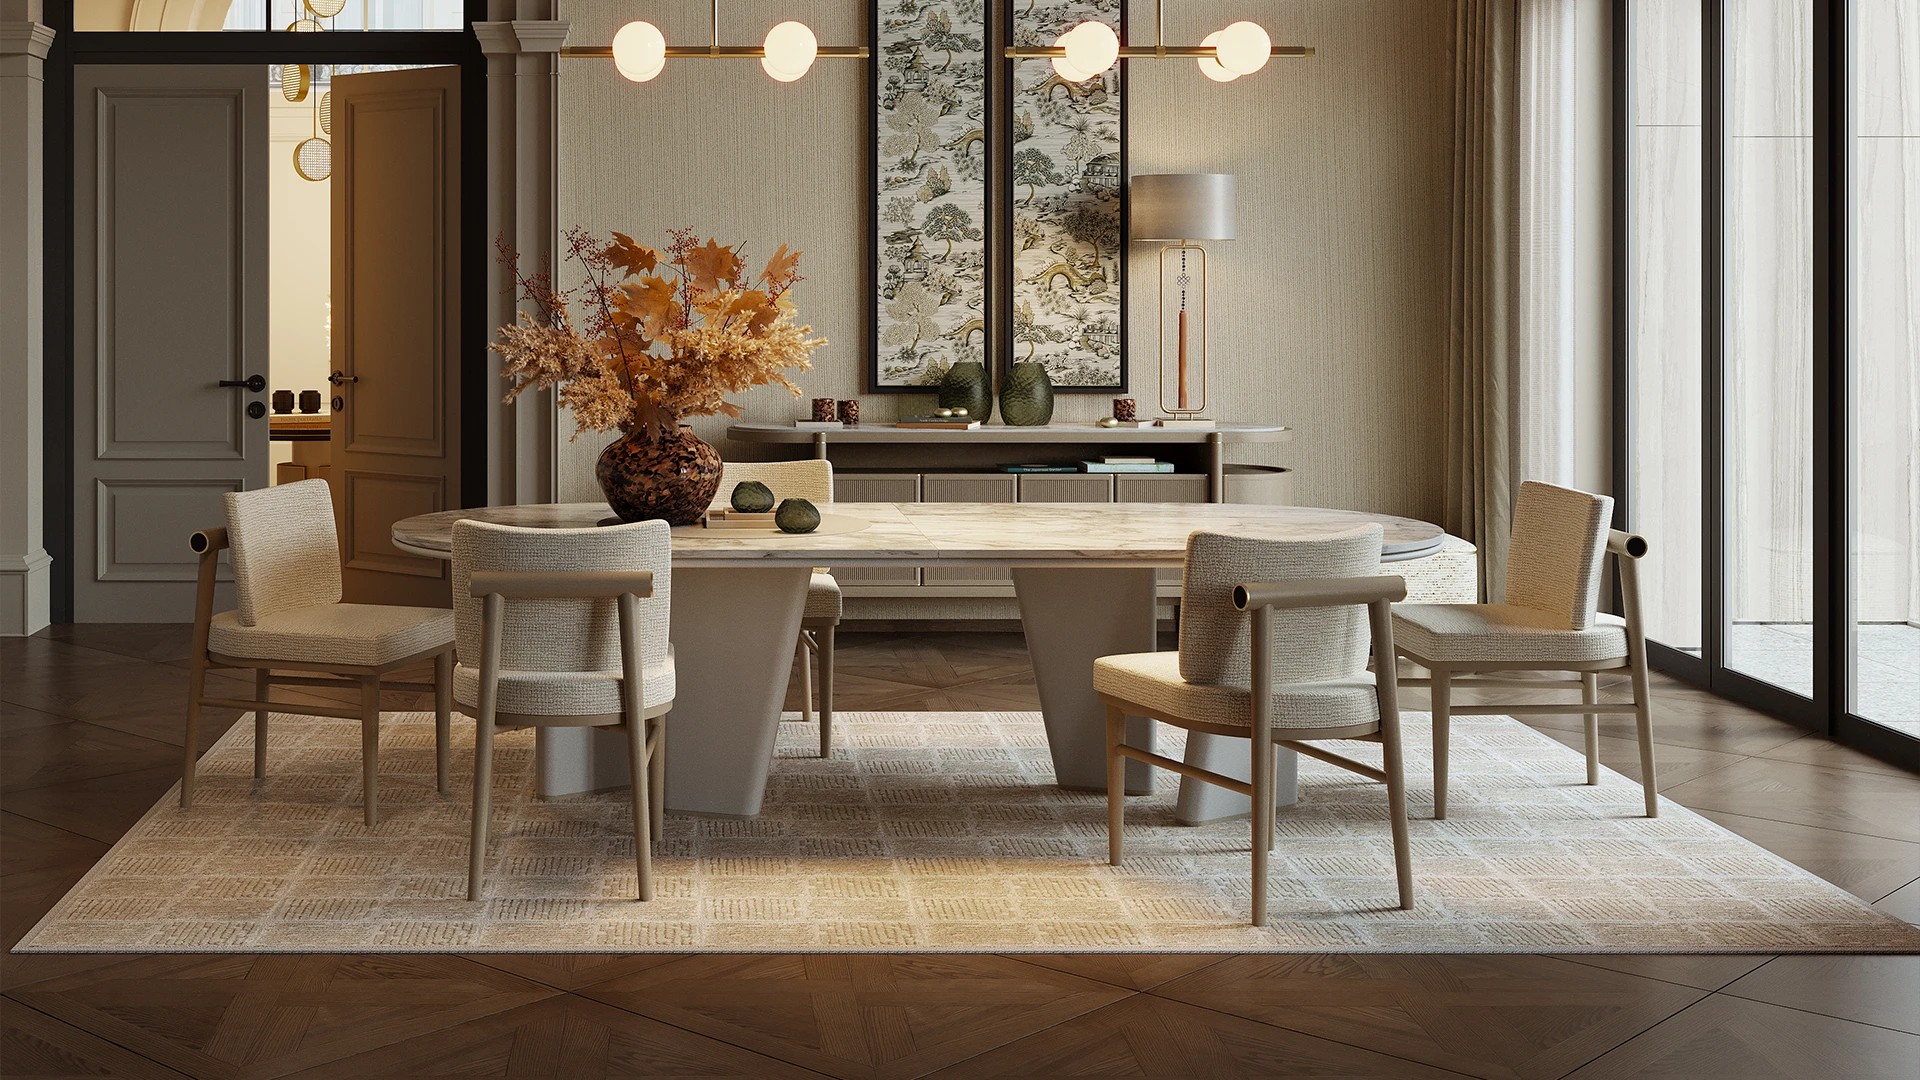 The Art of Dining - Dining Rooms